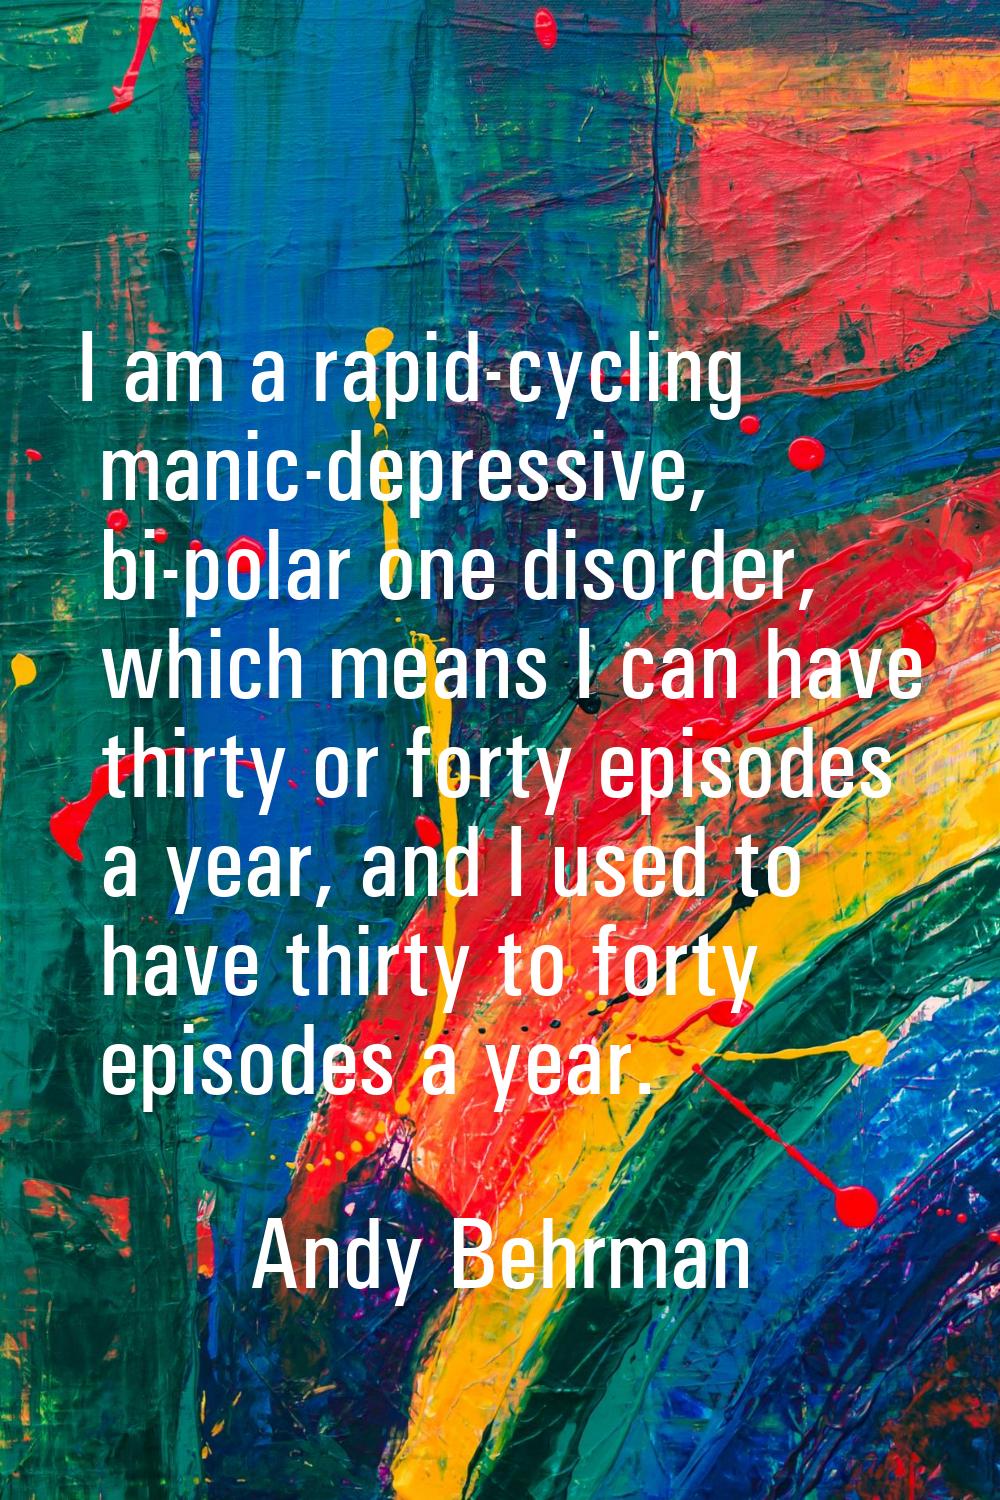 I am a rapid-cycling manic-depressive, bi-polar one disorder, which means I can have thirty or fort